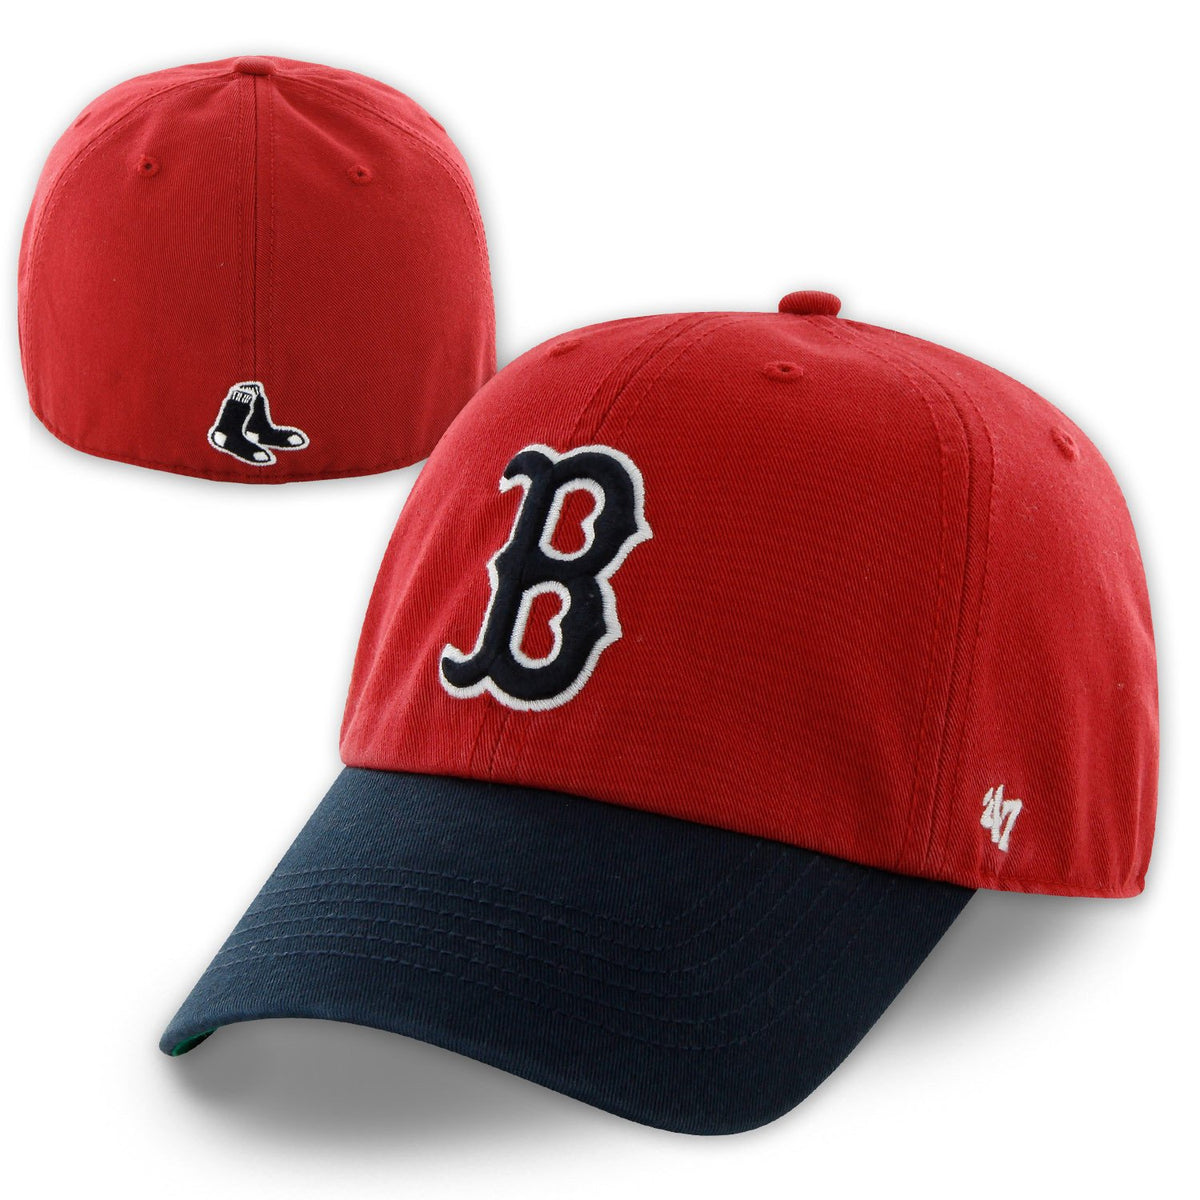 Men's Memphis Red Sox Rings & Crwns Navy Team Fitted Hat